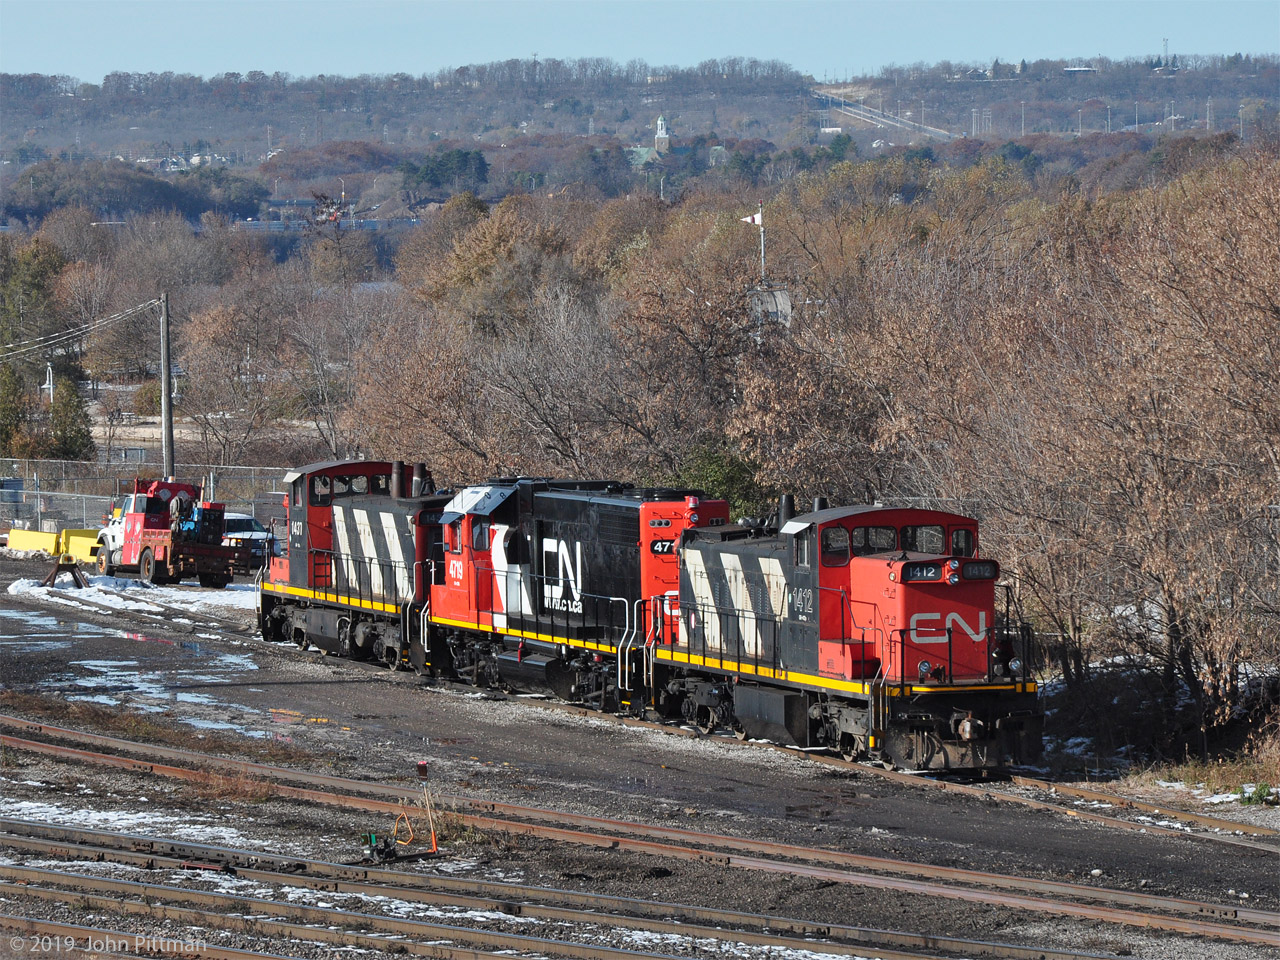 Two GMD-1 locos CN 1412 and 1437 with beltpack-capable GP38-2 CN 4719 between them are idling on the engine track at CN's Stuart St Yard in Hamilton on a rare sunny Sunday afternoon in November. 
Freshly repainted CN 4719 was seen arriving in the area on 23 Oct 2019; CN 422 dropped it off in Aldershot Yard. 
Also working in Hamilton yard together were blue GP38-2 GMTX 2163 and GP9rm CN 7029.
Coming this way later than usual is CN train 421, which dropped off a long cut of head end cars in the yard - quite a number were gondalas loaded with steel slabs.